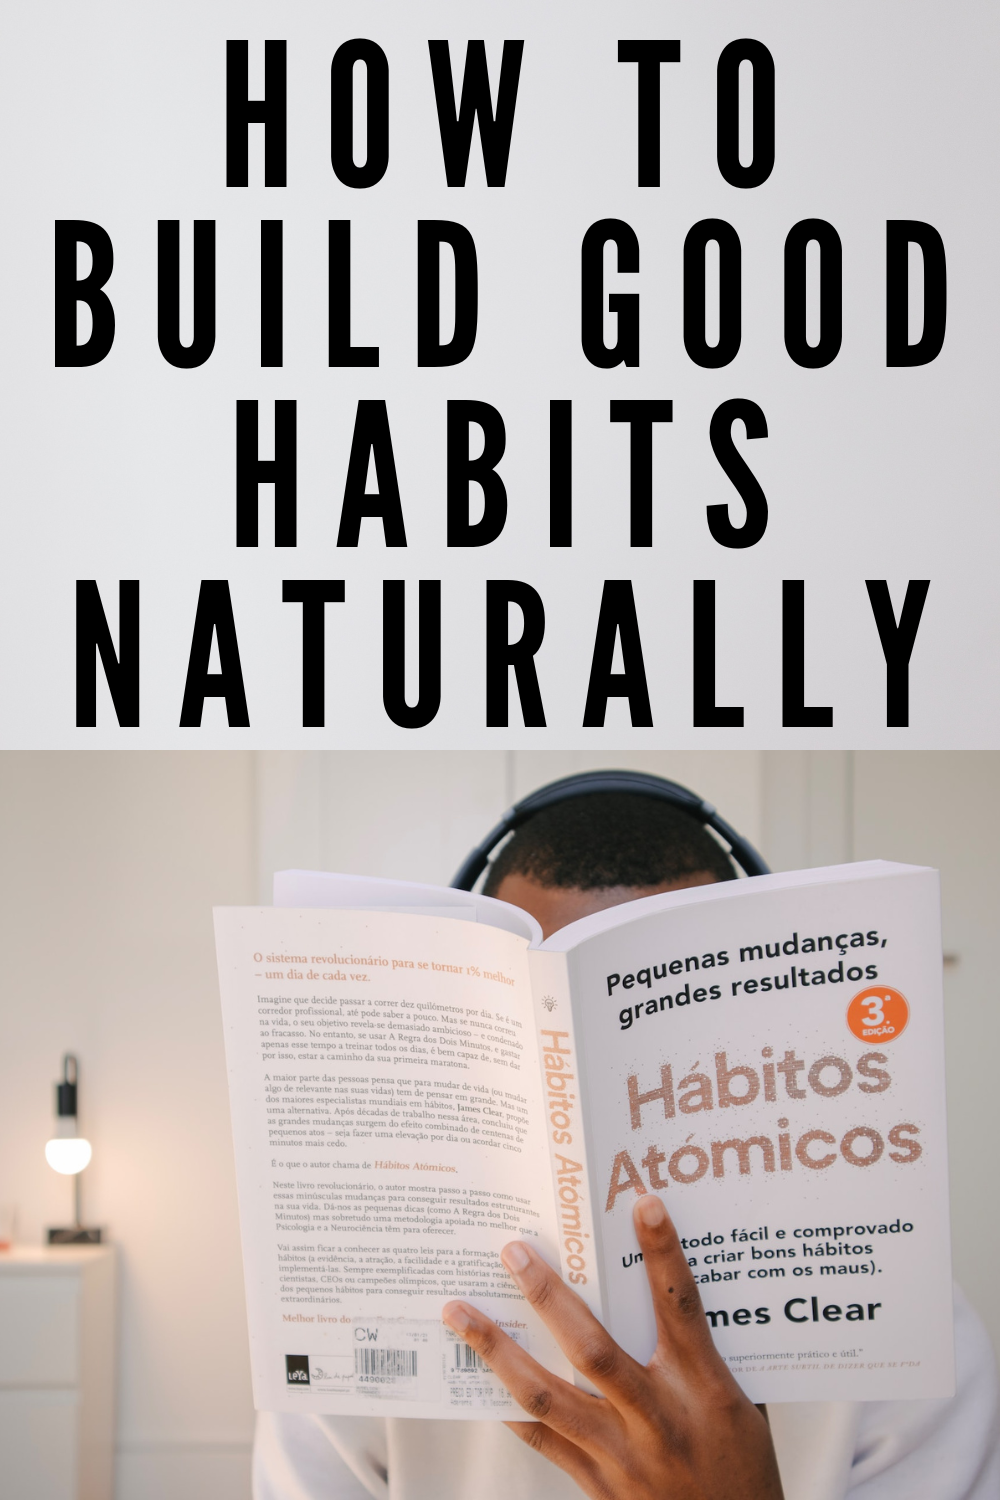 How to build good habits naturally